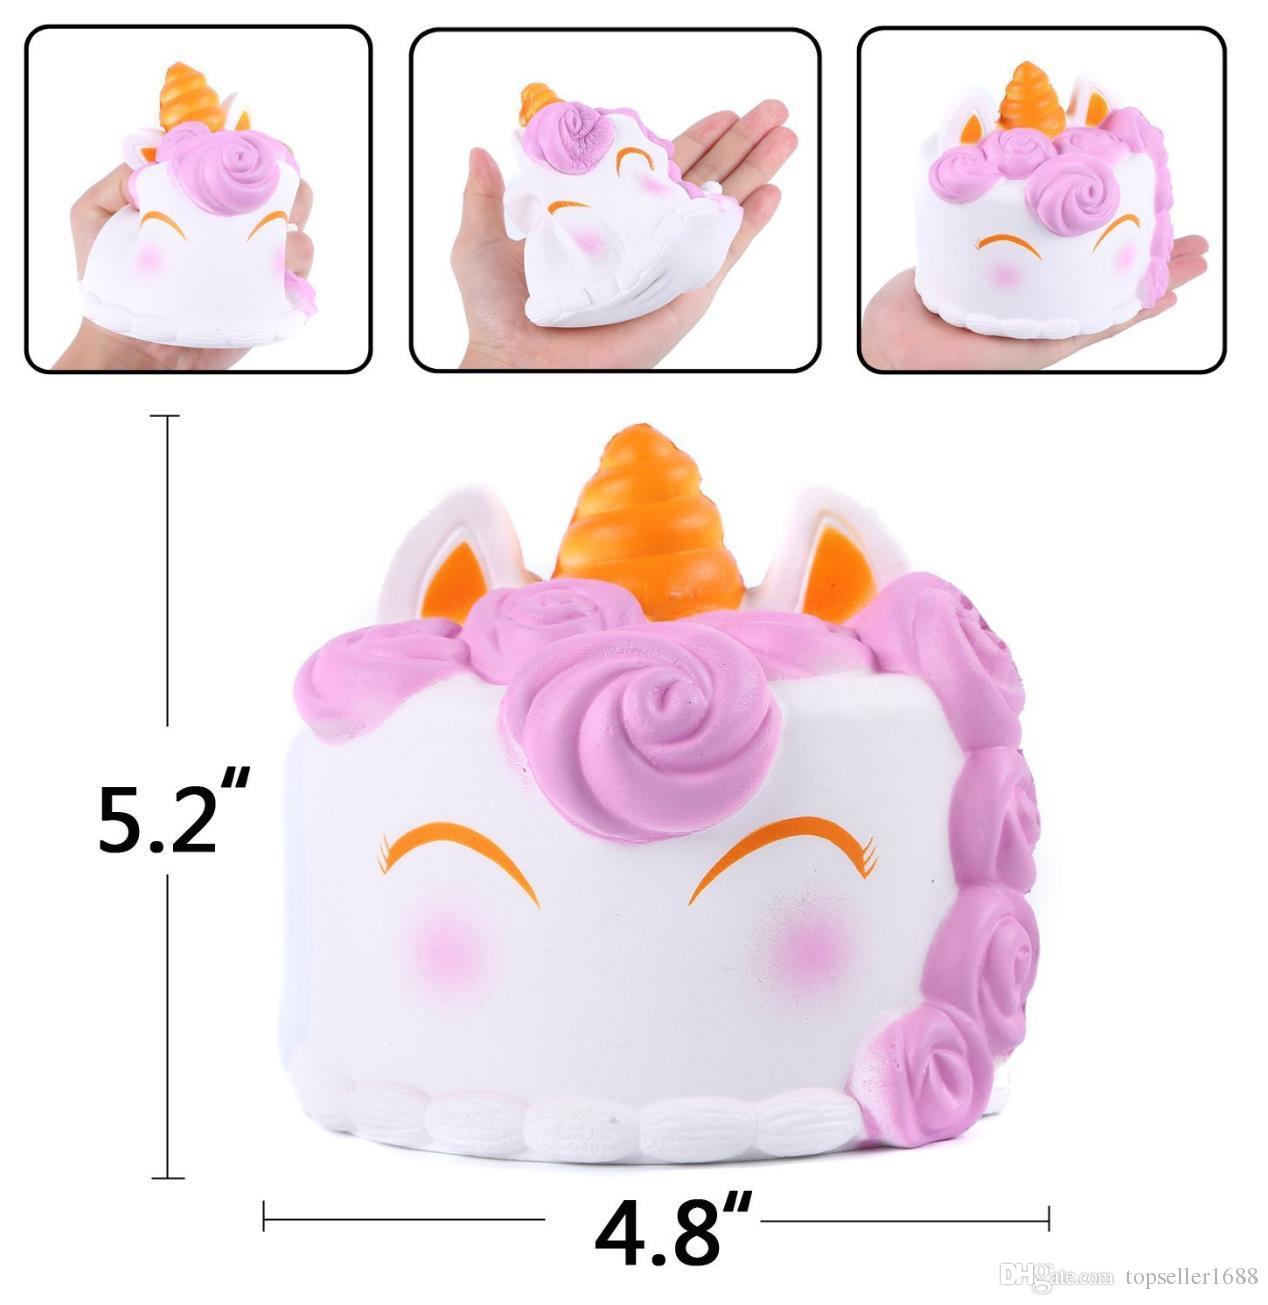 2018 Hottest Cellphone charms Squishy Unicorn Cake Jumbo Squishies Slow Rising Scent Large Phone Strap free ship